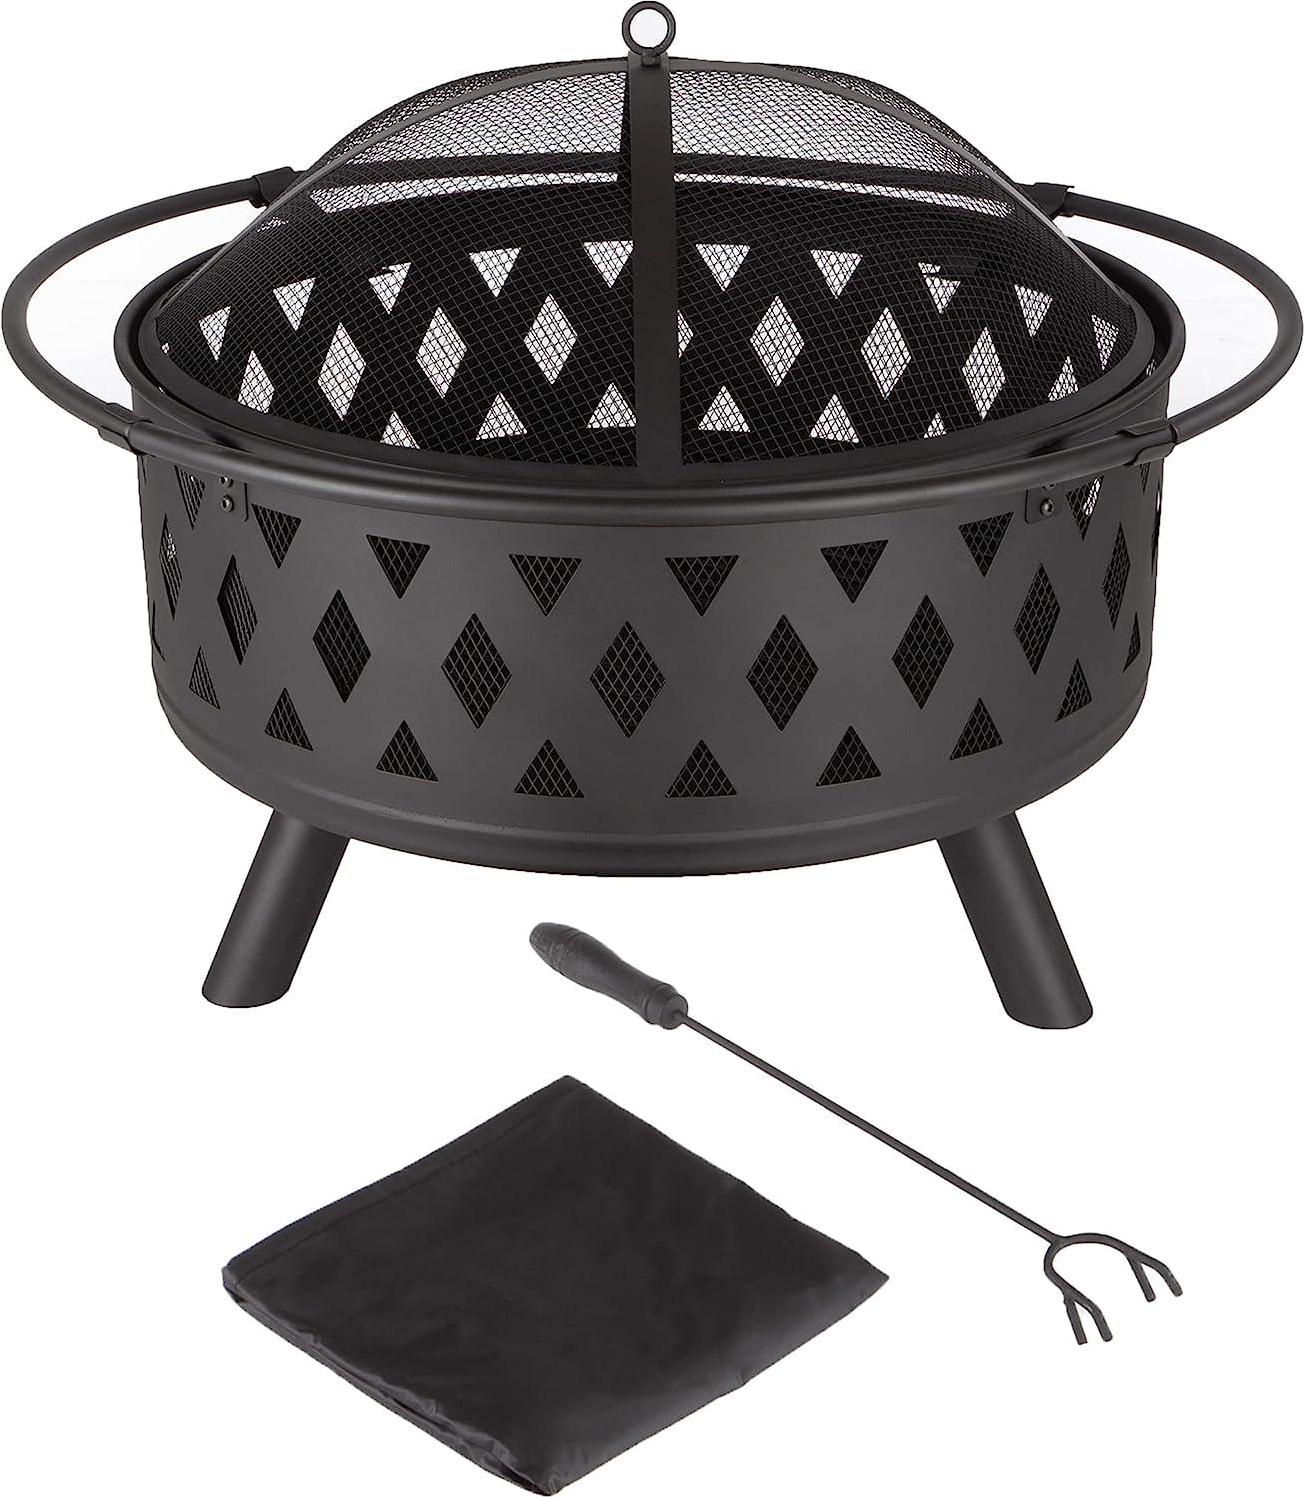 Fire Pit Set, Wood Burning Pit - Includes Screen, Cover and Log Poker - Great for Outdoor and Patio, 32 inch Round Crossweave Firepit by Pure Garden